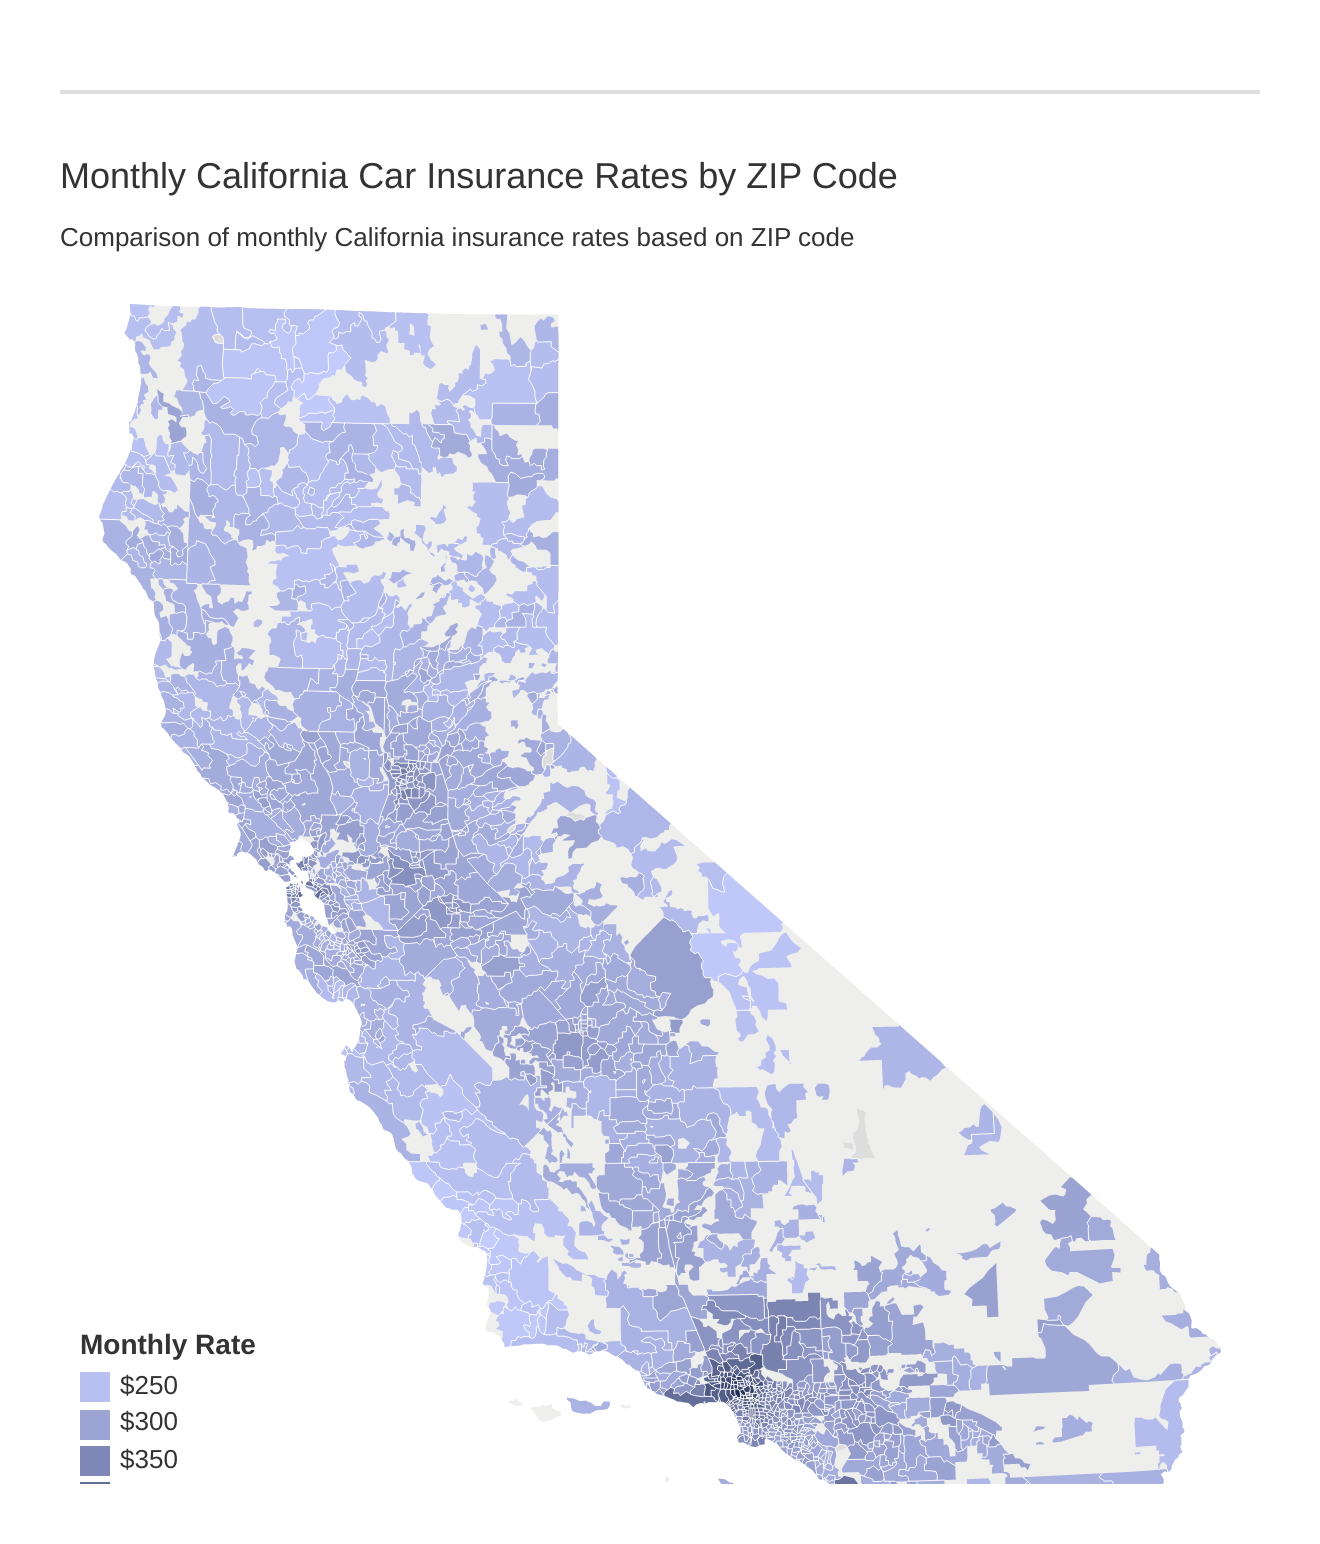 Monthly California Car Insurance Rates by ZIP Code